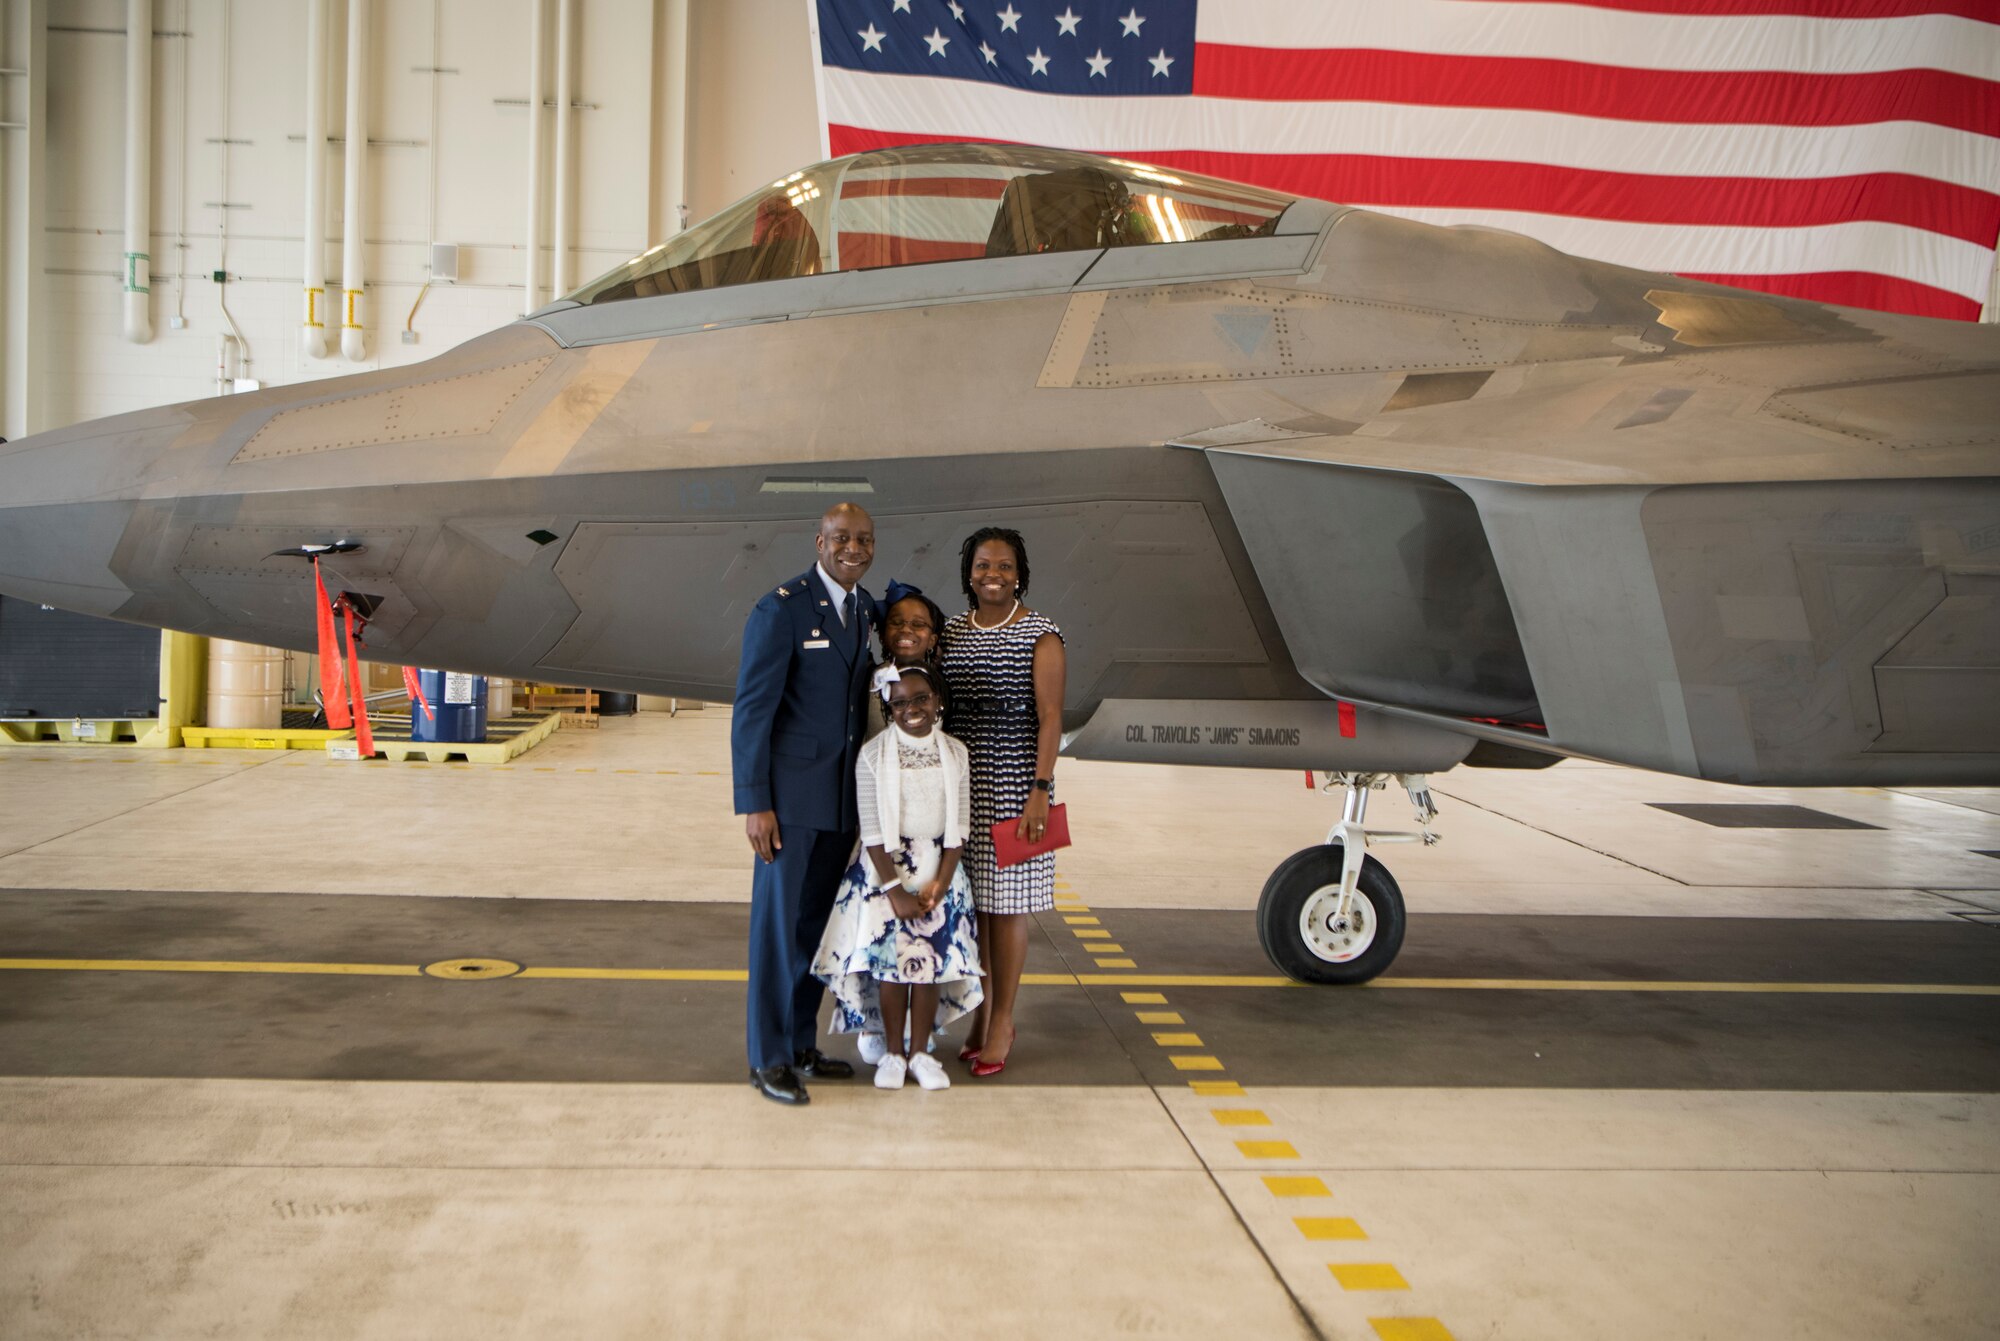 U.S. Air Force Col. Travolis Simmons, his wife Jamese, and daughters Victoria and Elizabeth, pose for a photo in front of a U.S. Air Force F-22 Raptor that was unveiled with his name as he assumed command of the 3rd Wing at Joint Base Elmendorf-Richardson, Alaska, July 17, 2020. The 3rd WG provides trained and equipped tactical air dominance forces, command and control platforms, and strategic and tactical airlift resources for contingency operations and also provides immediate early airborne detection, warning, surveillance and interception of hostile forces within the Alaskan North American Aerospace Defense Command Region. The ceremony was adapted to comply with COVID-19 health and safety measures.